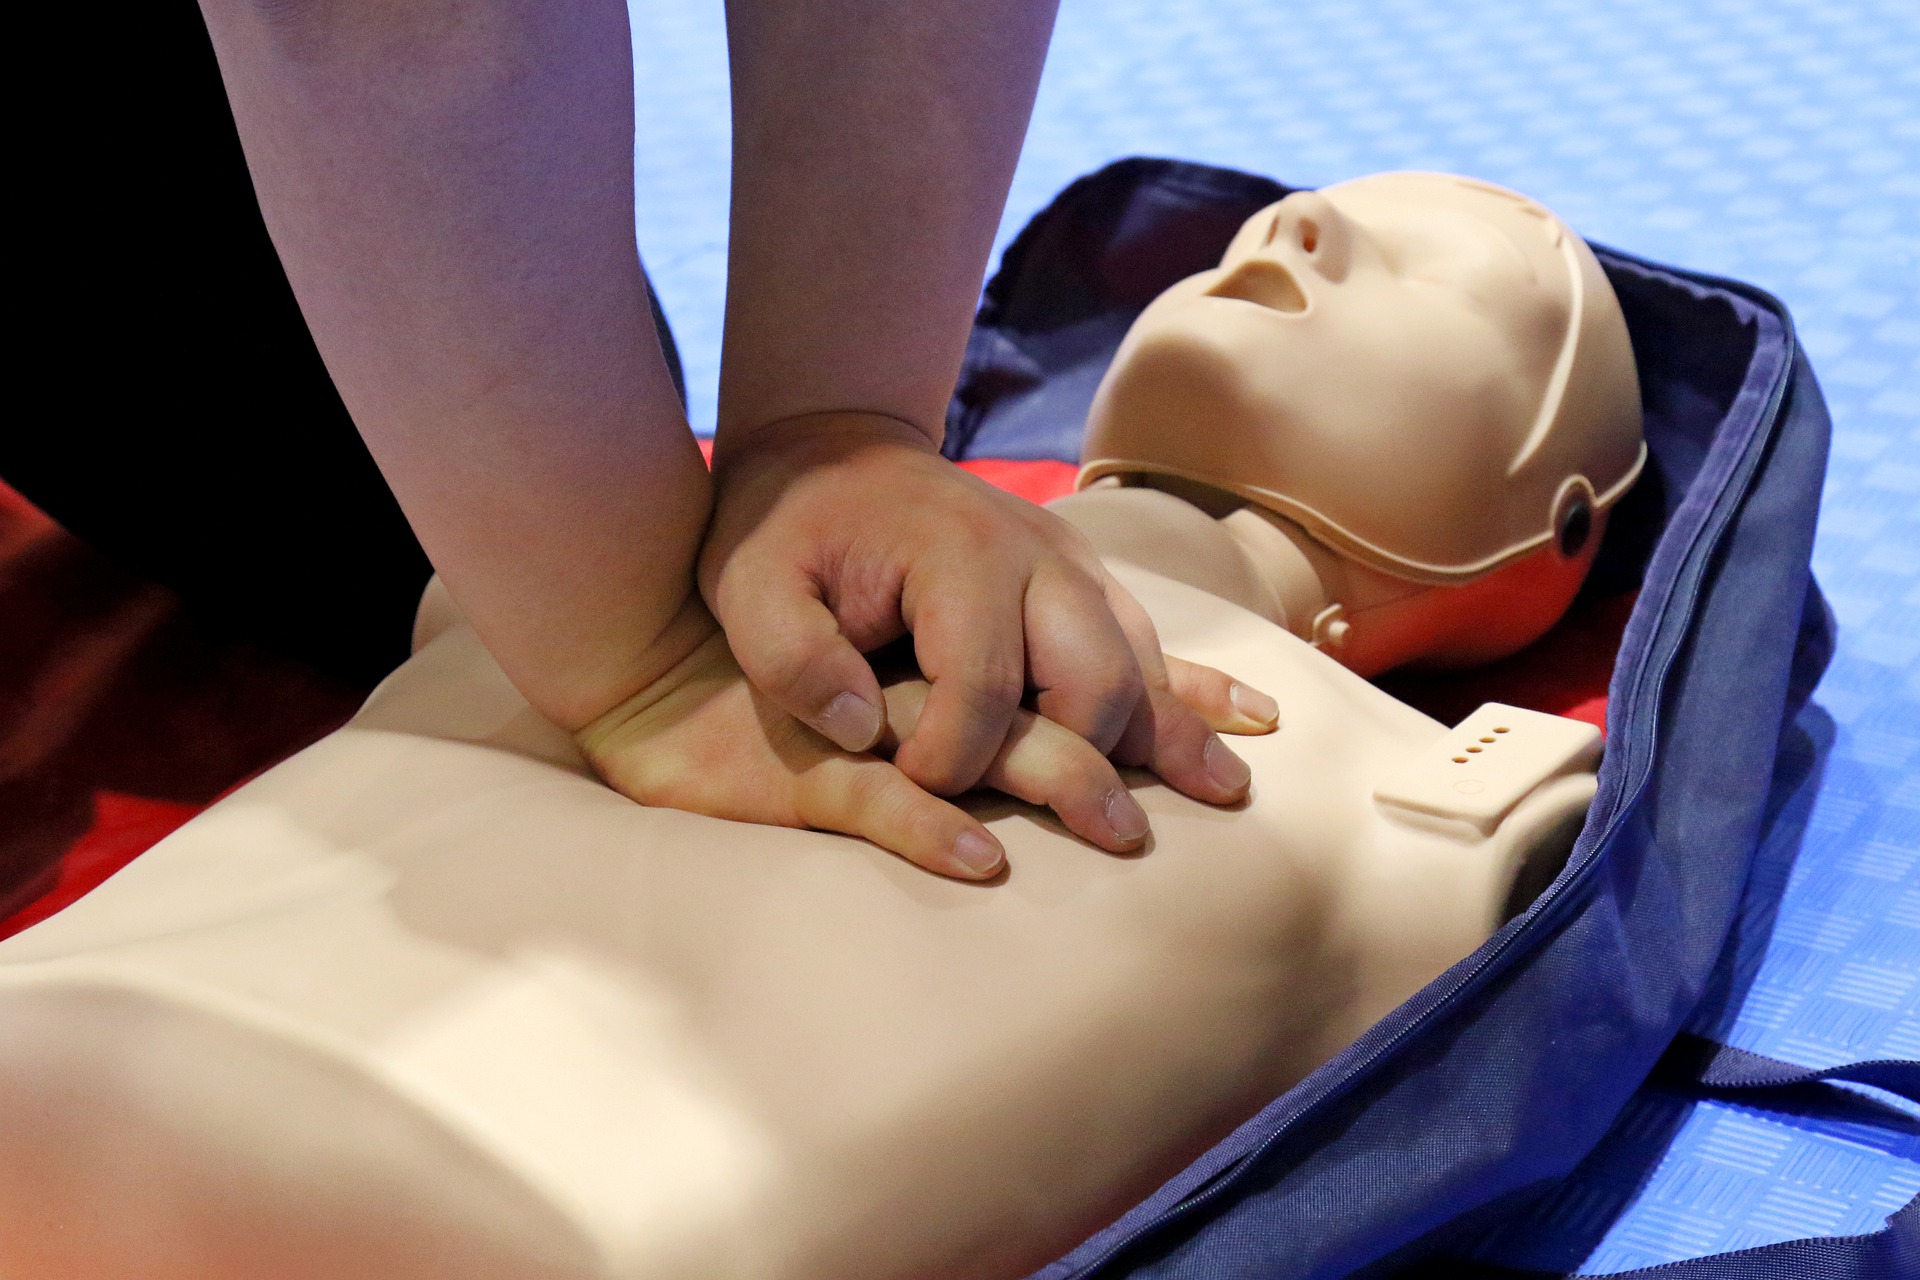 cpr questions